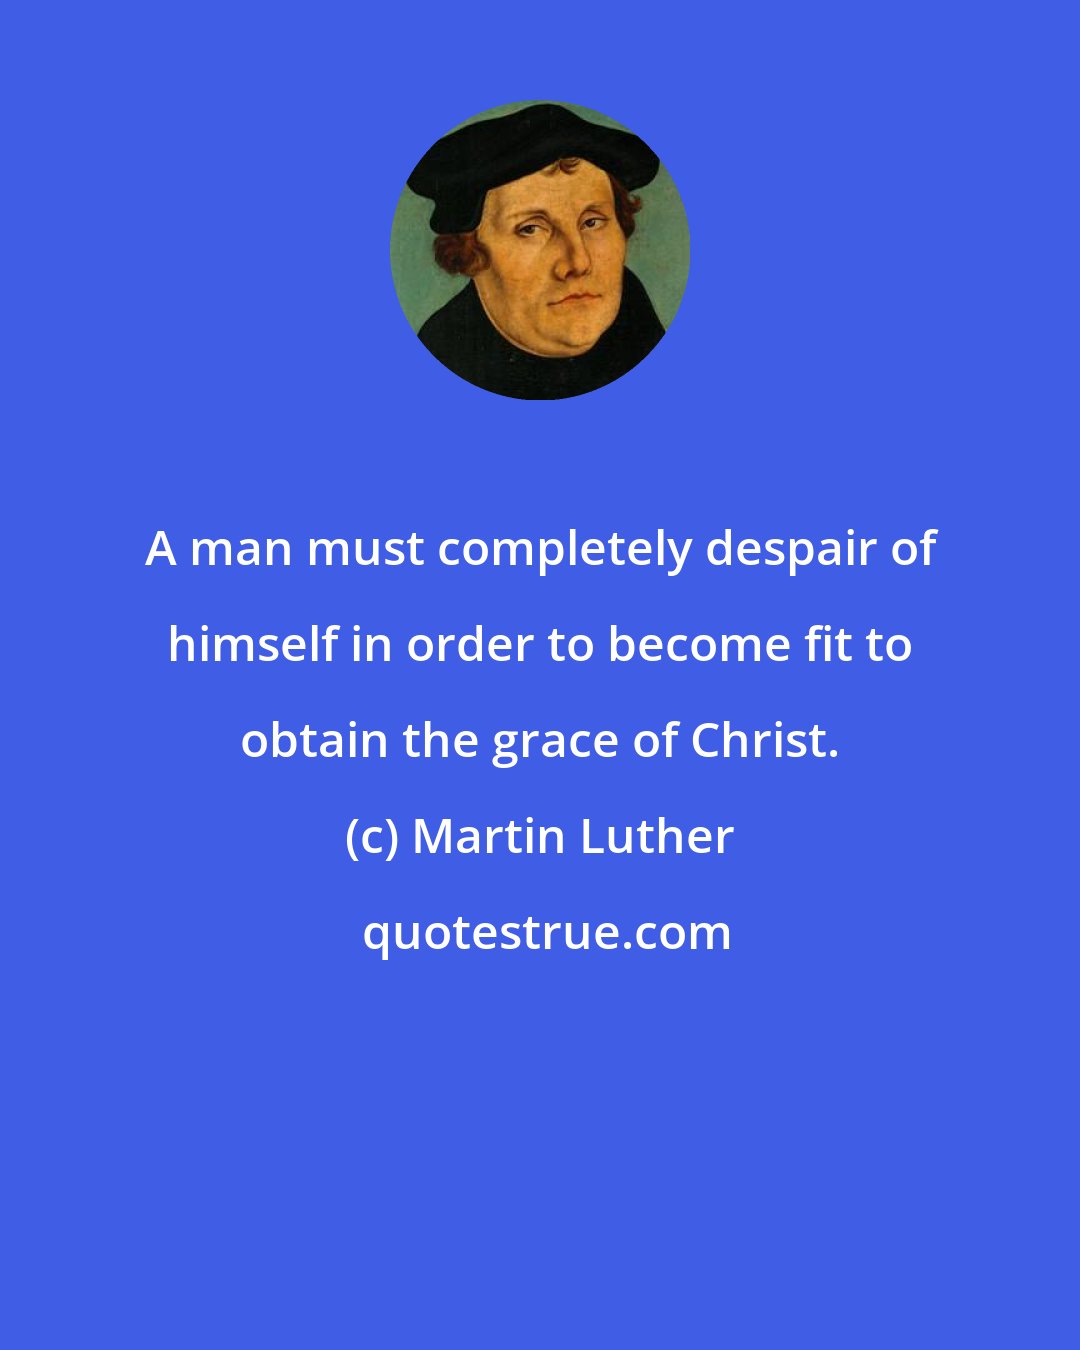 Martin Luther: A man must completely despair of himself in order to become fit to obtain the grace of Christ.